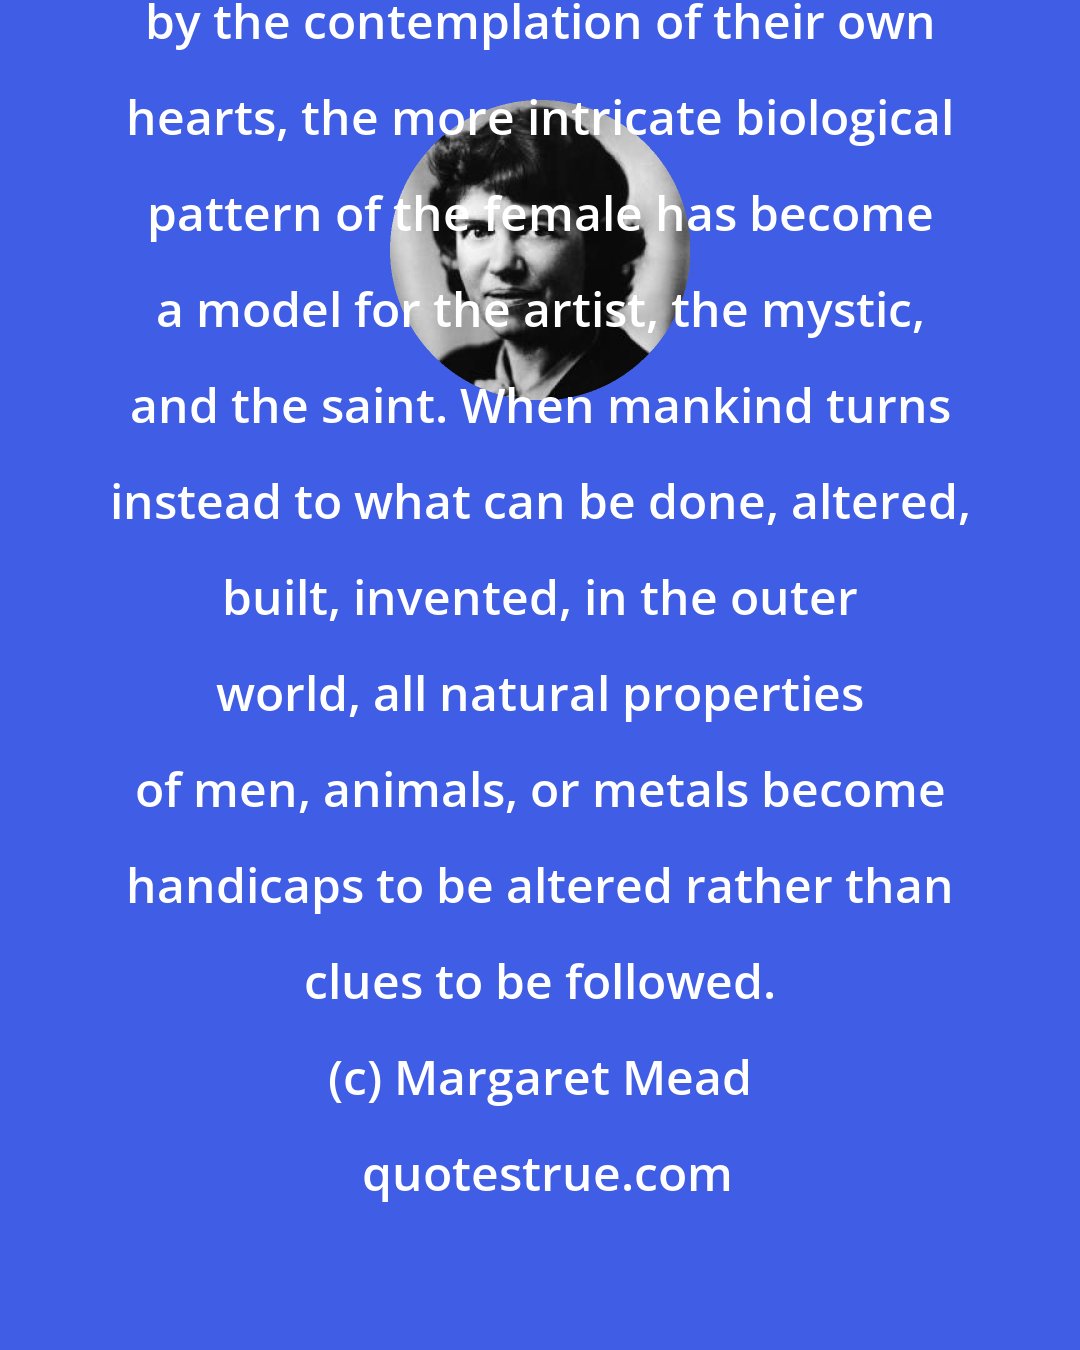 Margaret Mead: When human beings have been fascinated by the contemplation of their own hearts, the more intricate biological pattern of the female has become a model for the artist, the mystic, and the saint. When mankind turns instead to what can be done, altered, built, invented, in the outer world, all natural properties of men, animals, or metals become handicaps to be altered rather than clues to be followed.